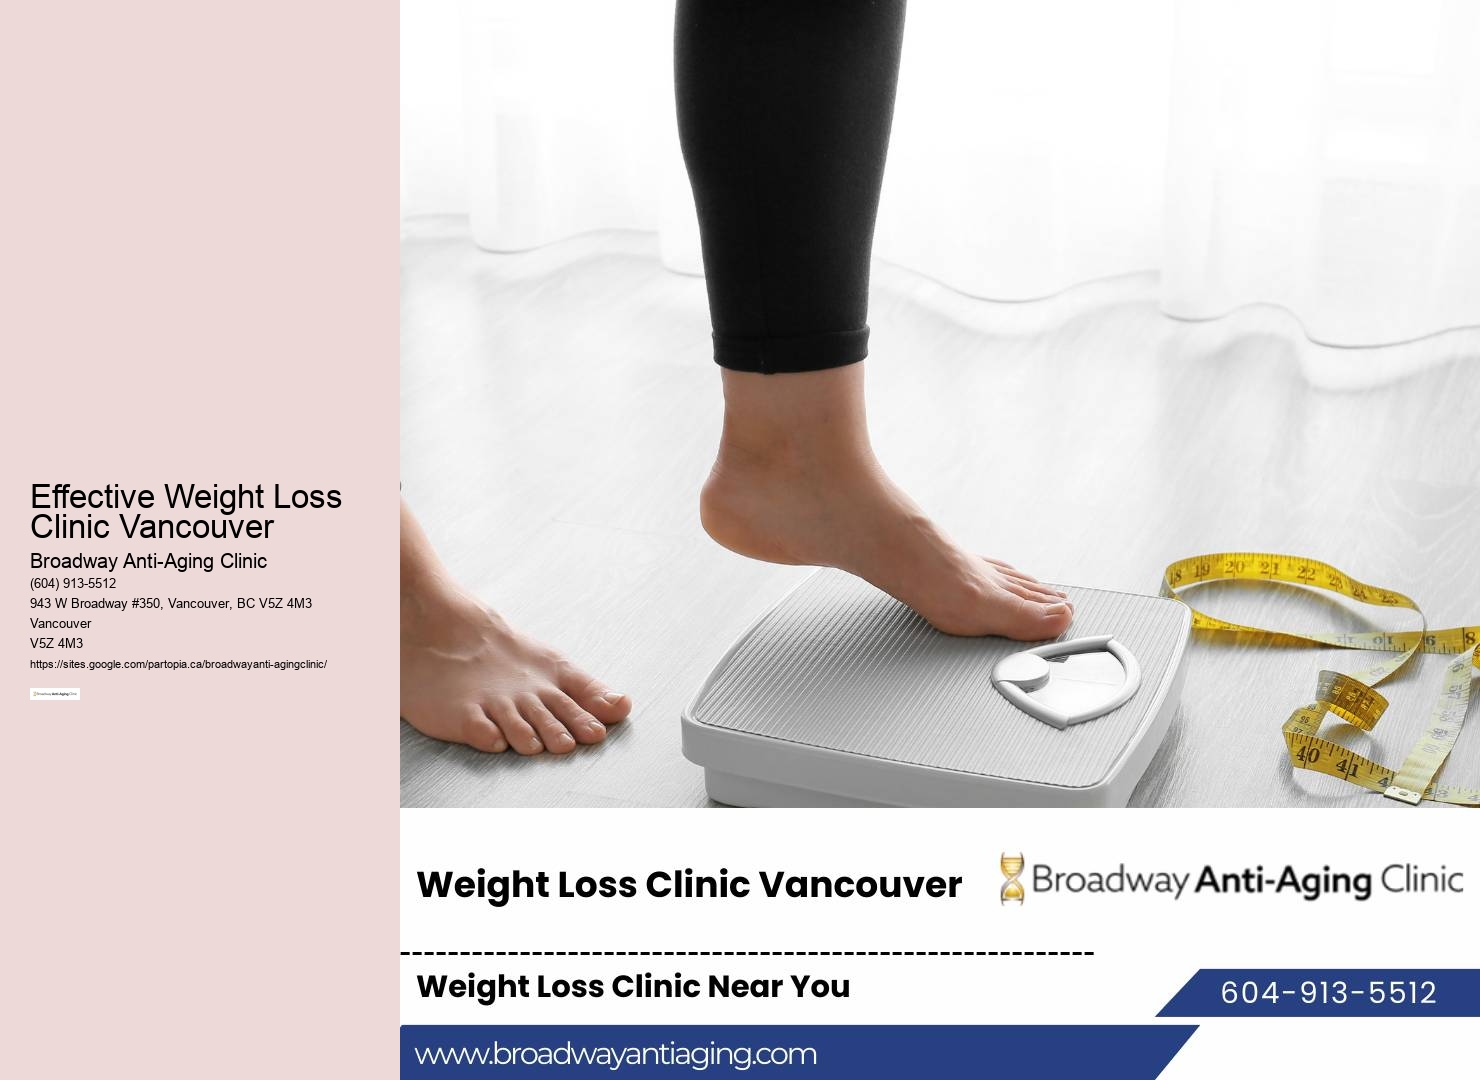 Weight Loss Support Groups in Vancouver